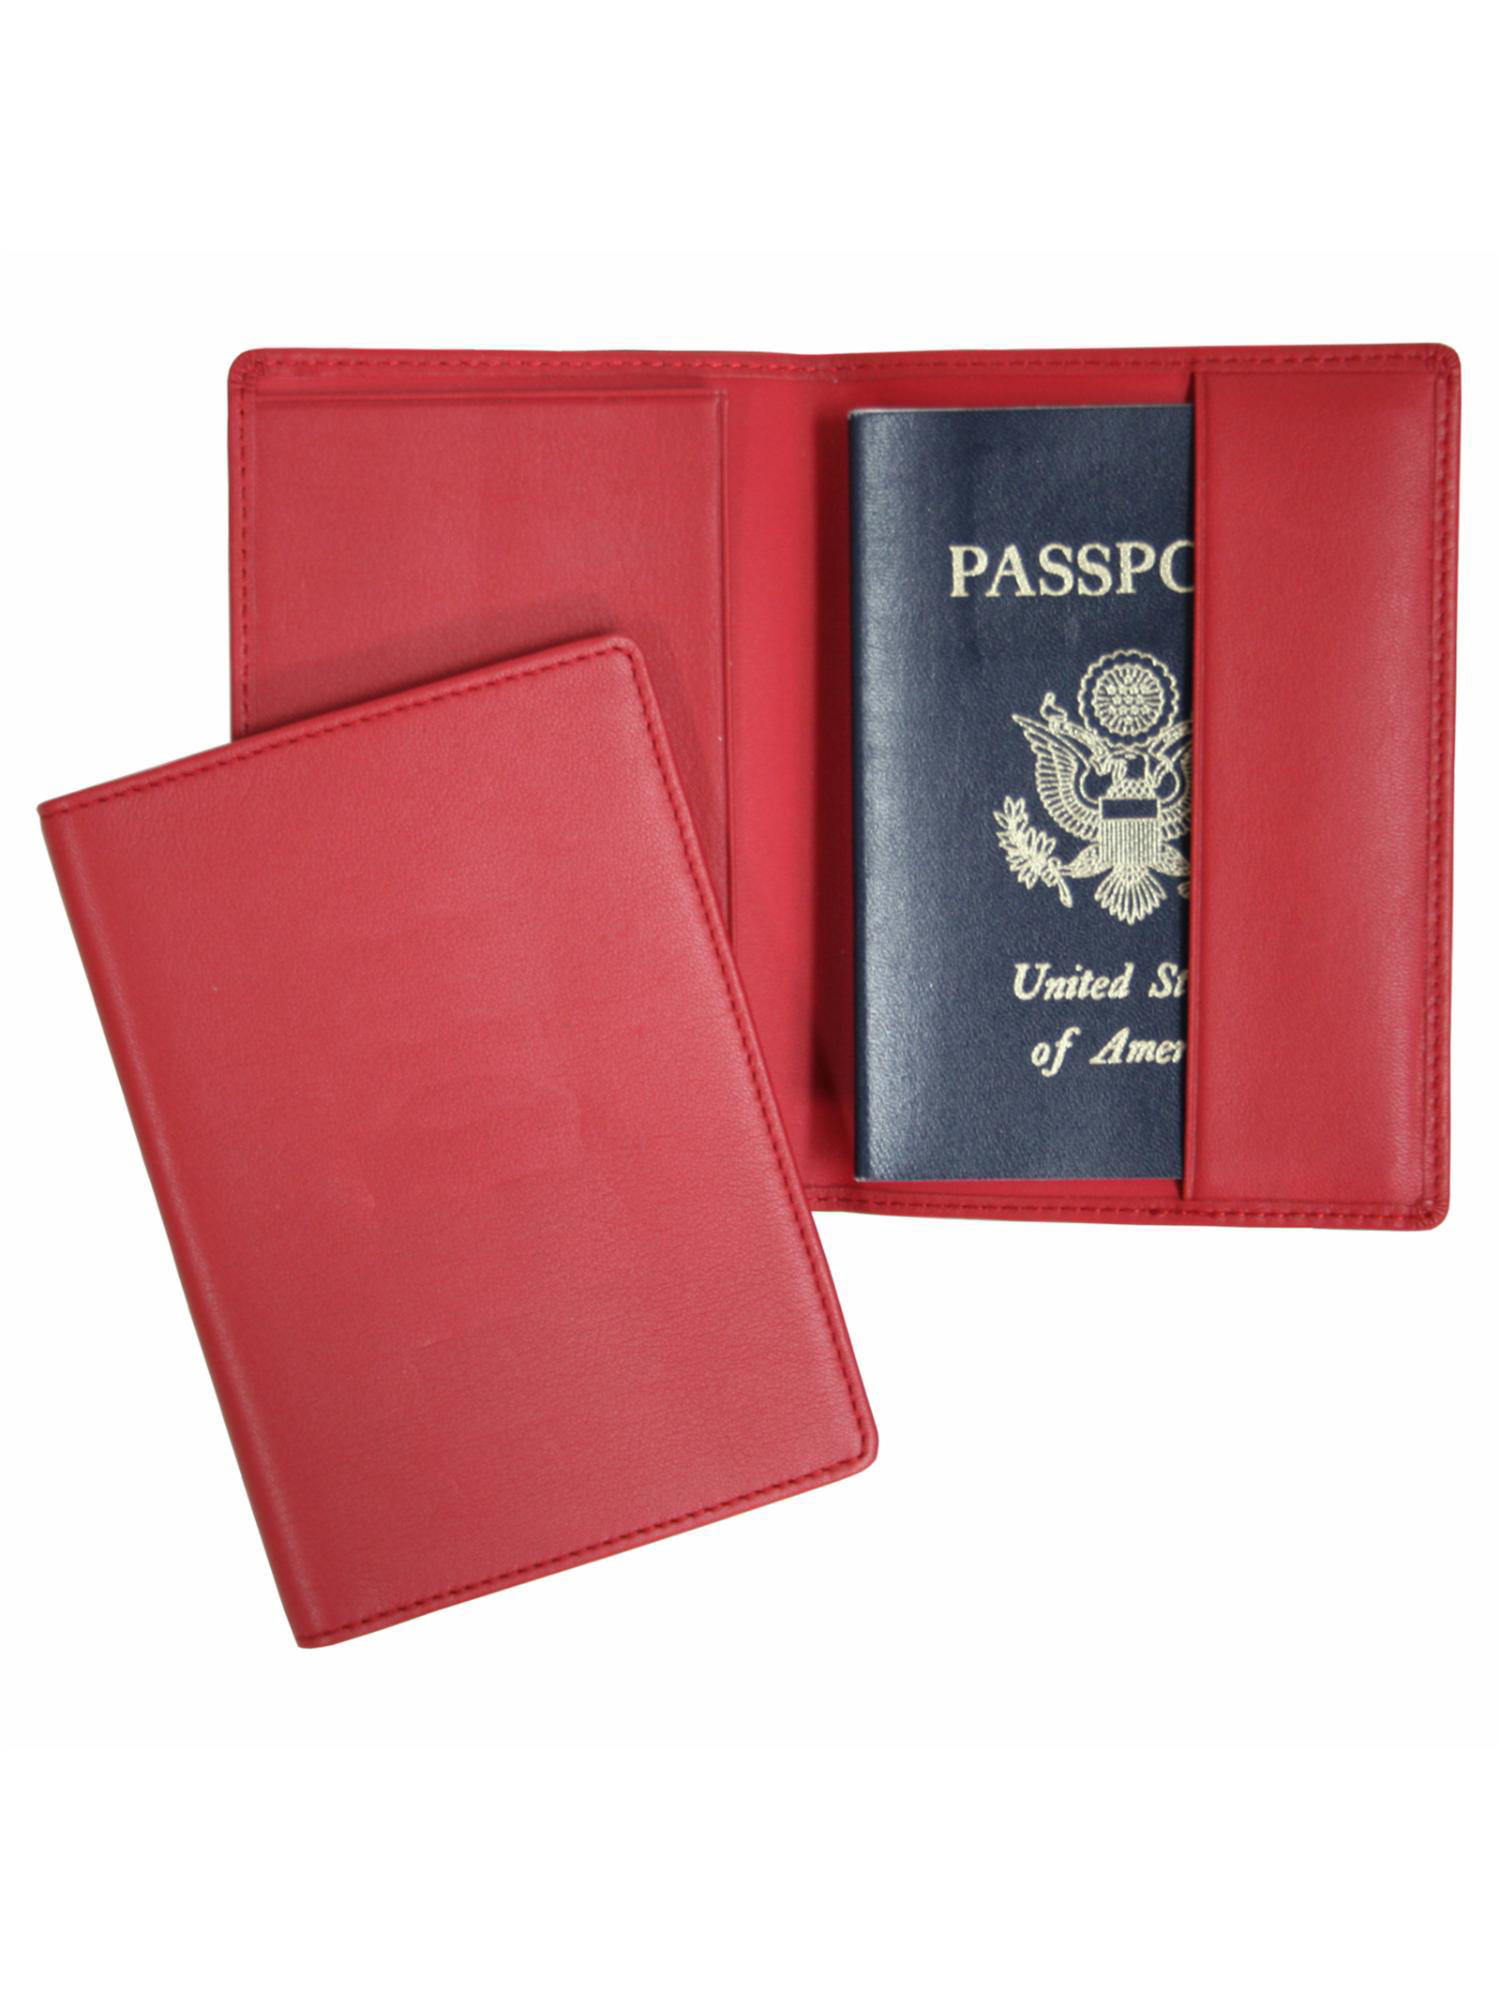 Dogs Face Top Blur Leather Passport Holder Cover Case Travel One Pocket